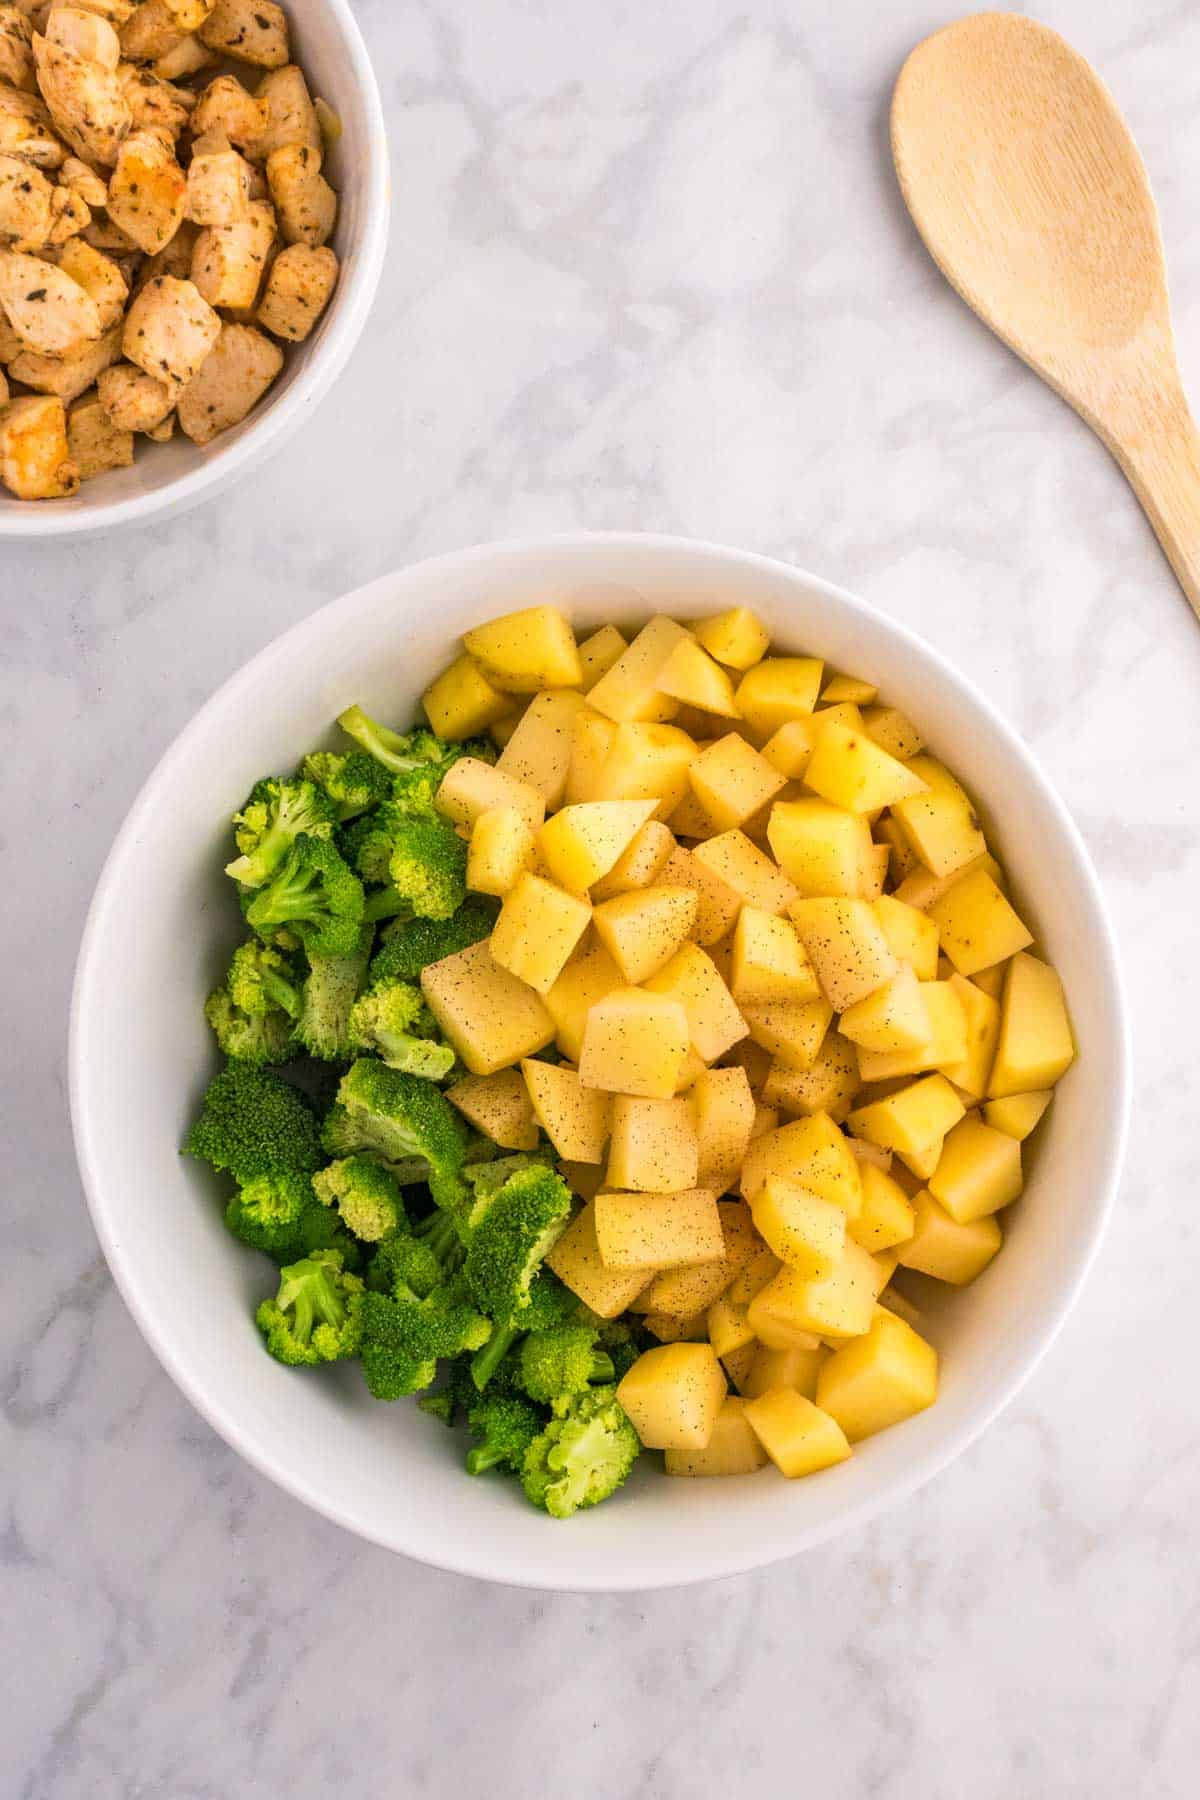 broccoli florets and cubed potatoes in a bowl